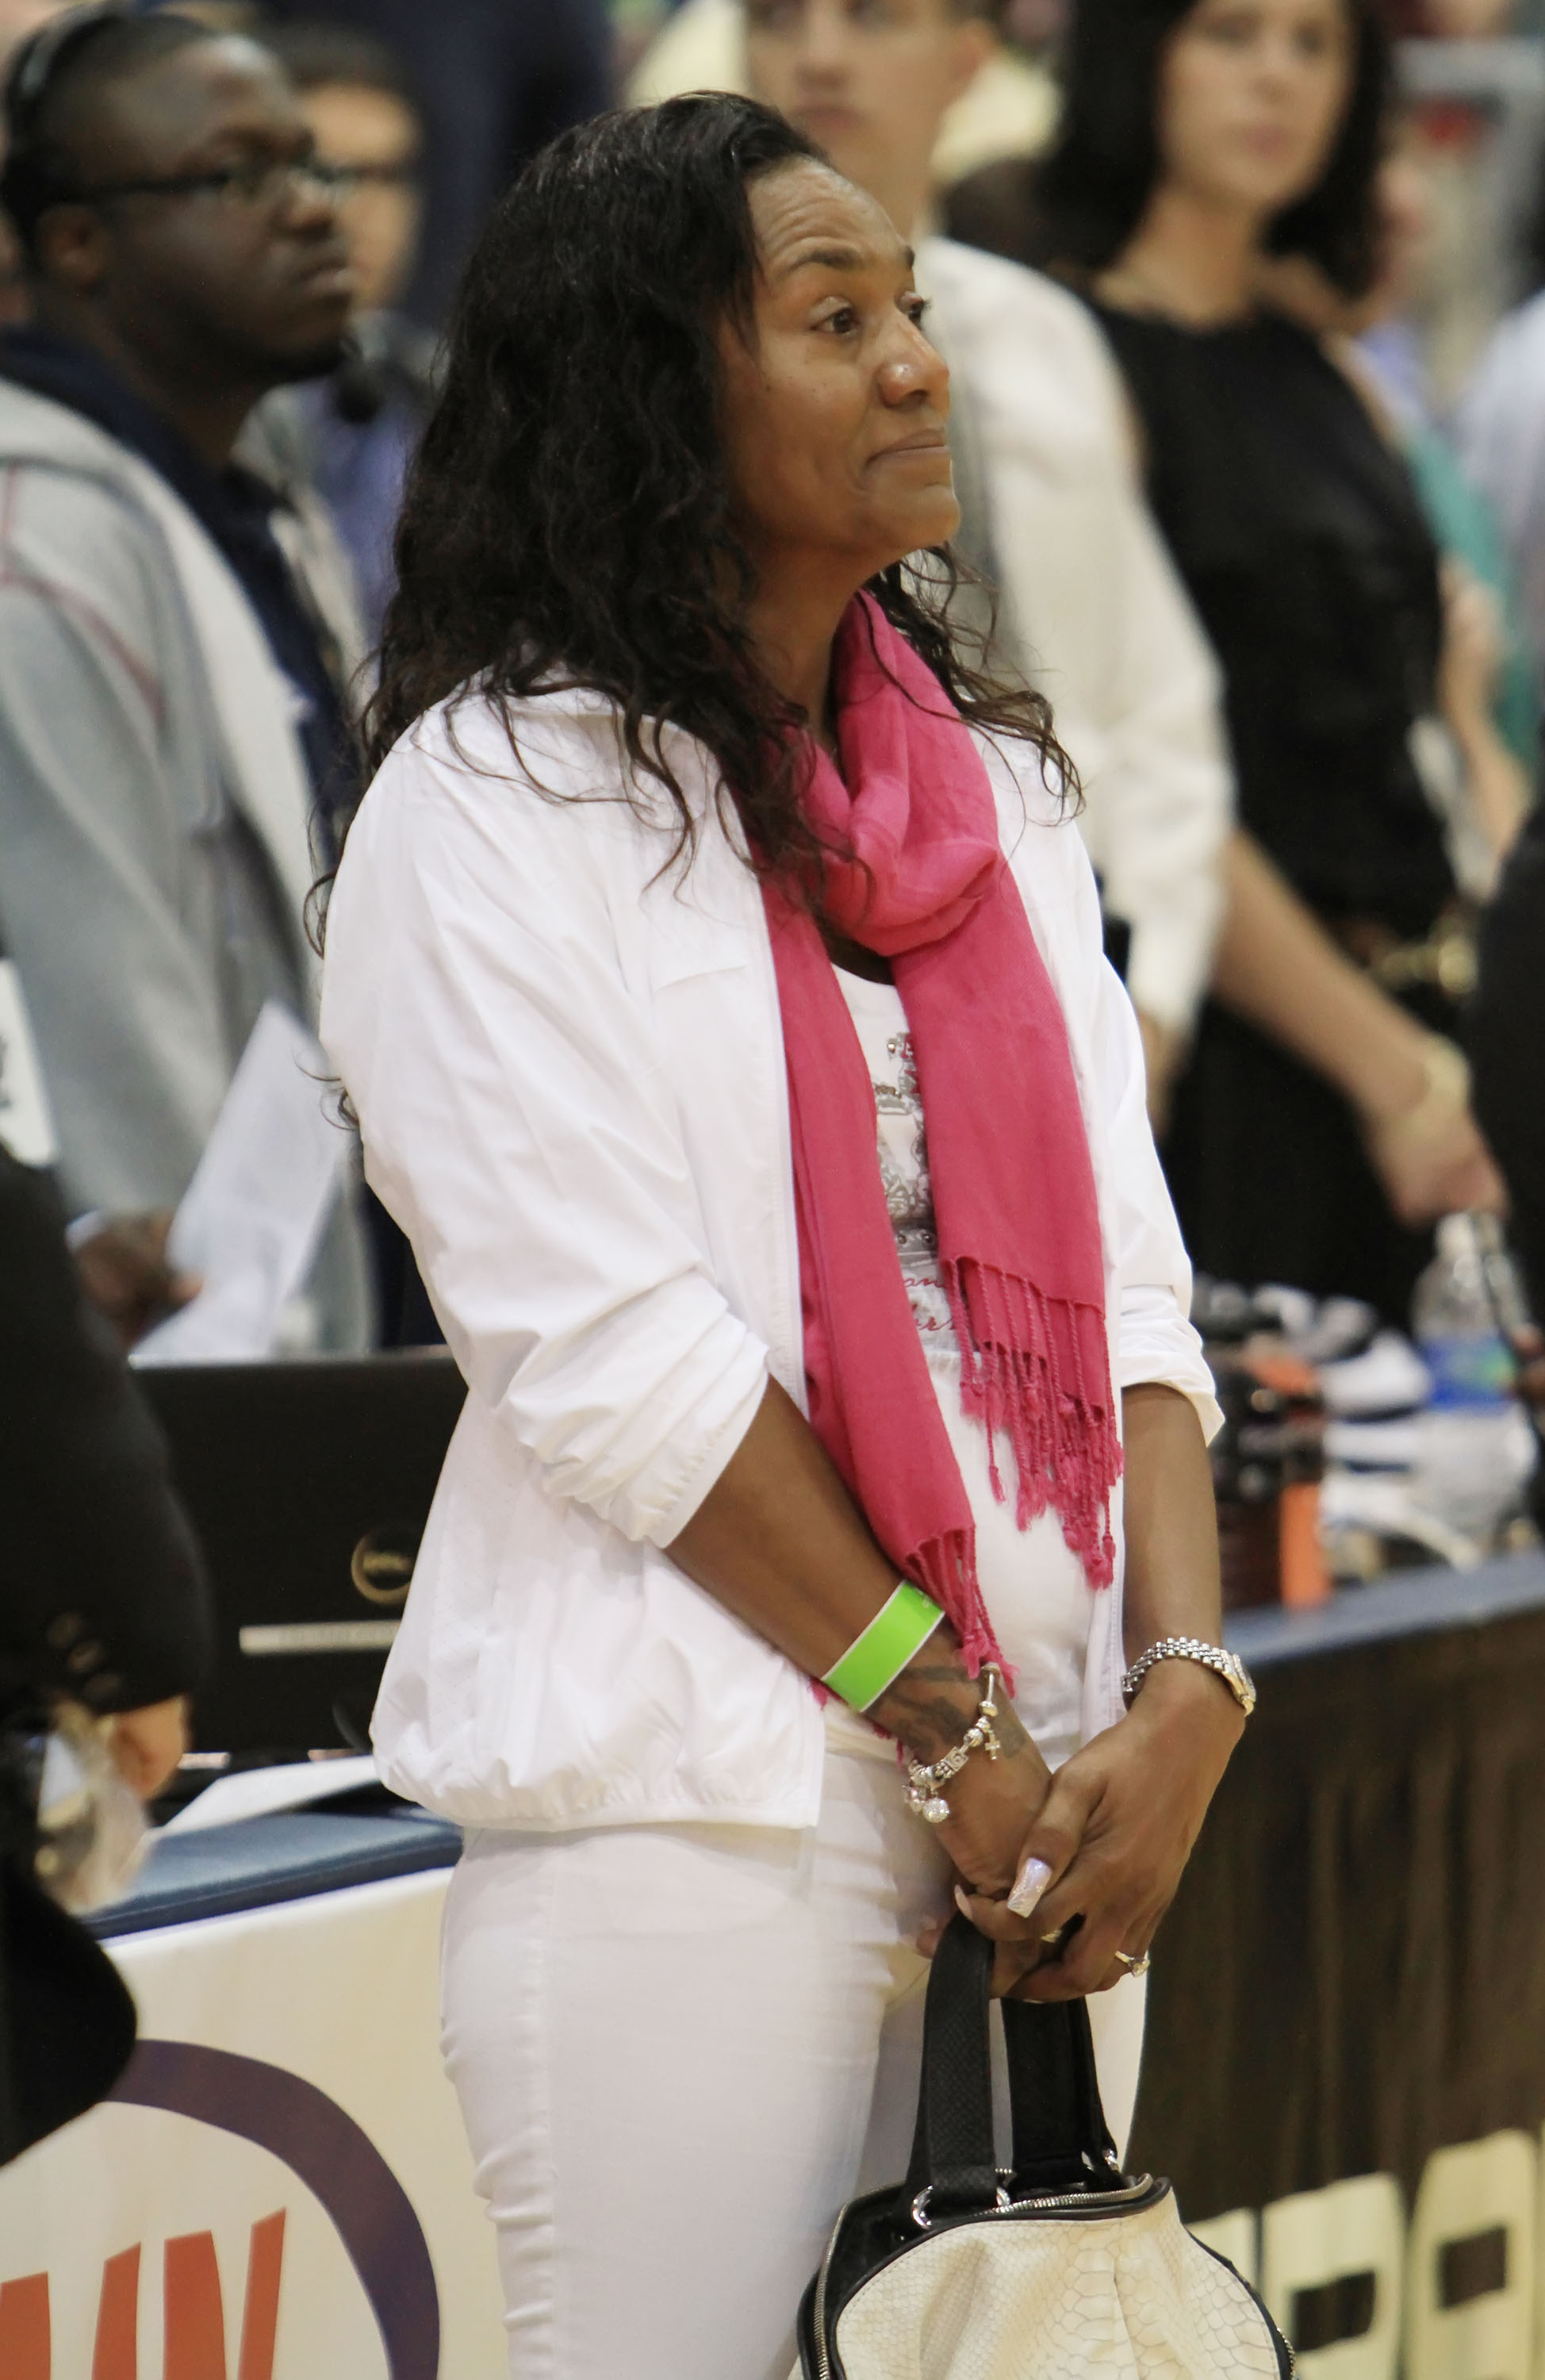 LeBron James' mother, Gloria James, attends South Florida All-Star Classic game at Florida International University on October 8, 2011, in Miami, Florida | Source: Getty Images